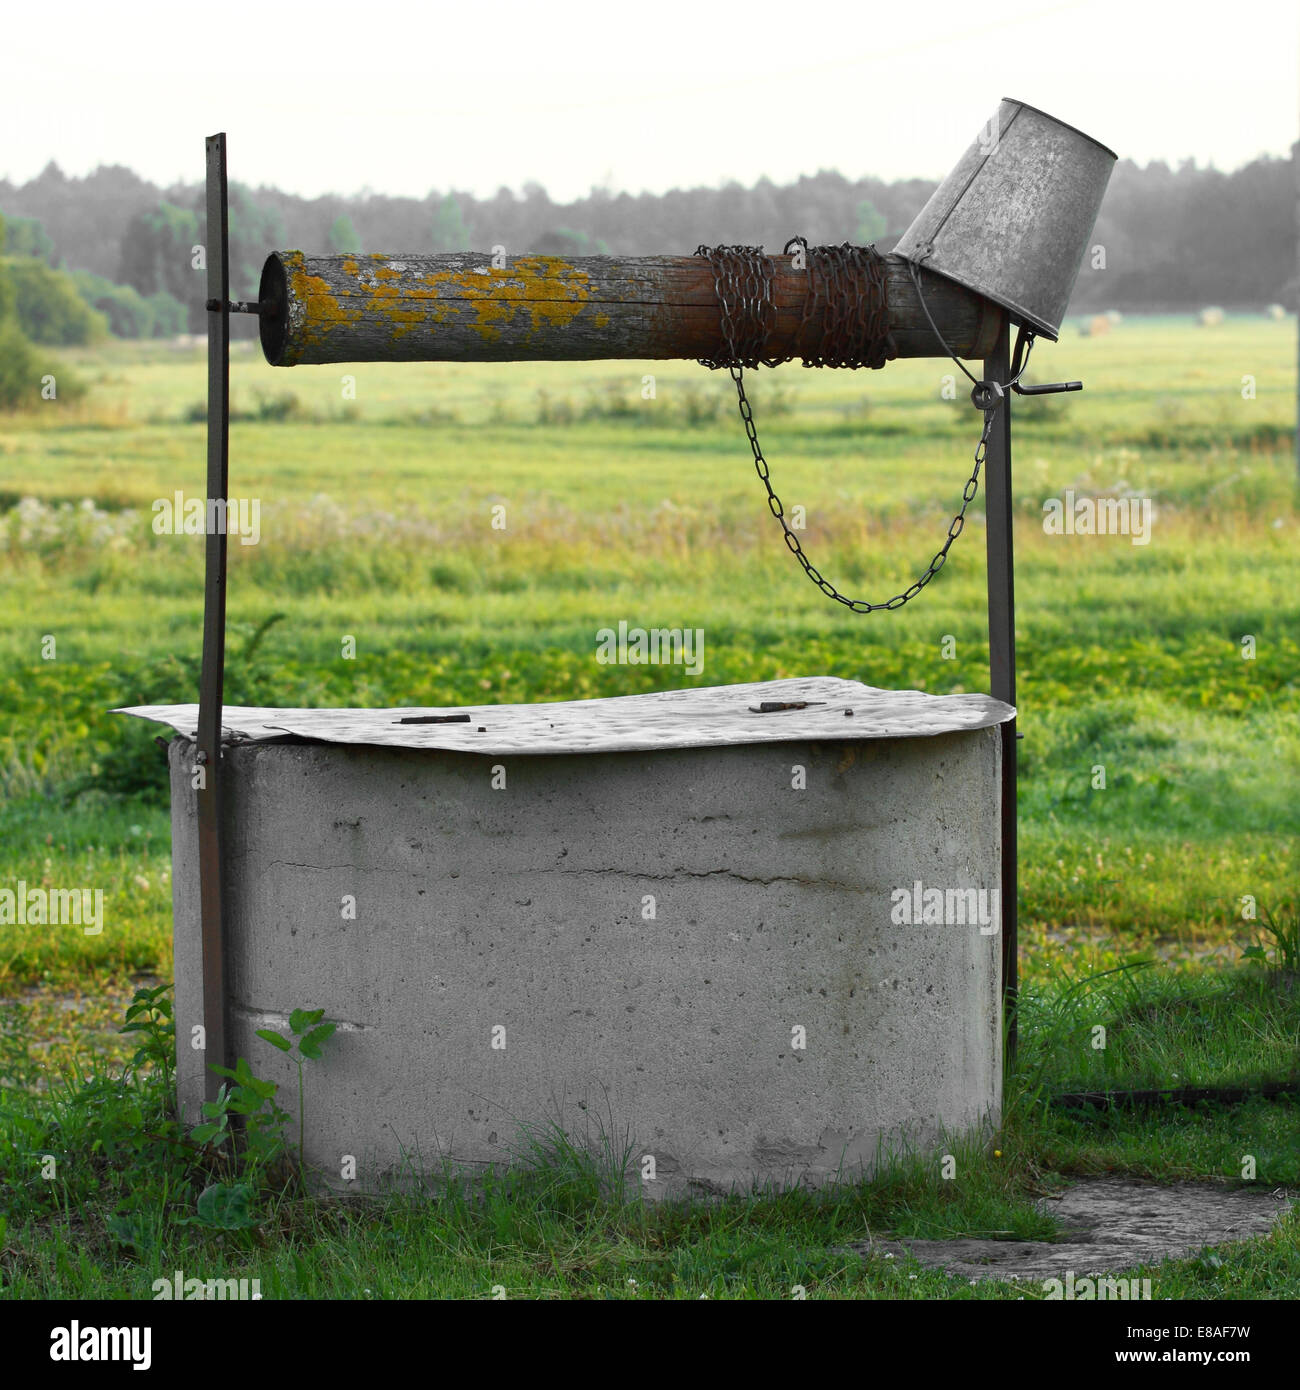 Concrete well with tin bucket on natural country background Stock Photo